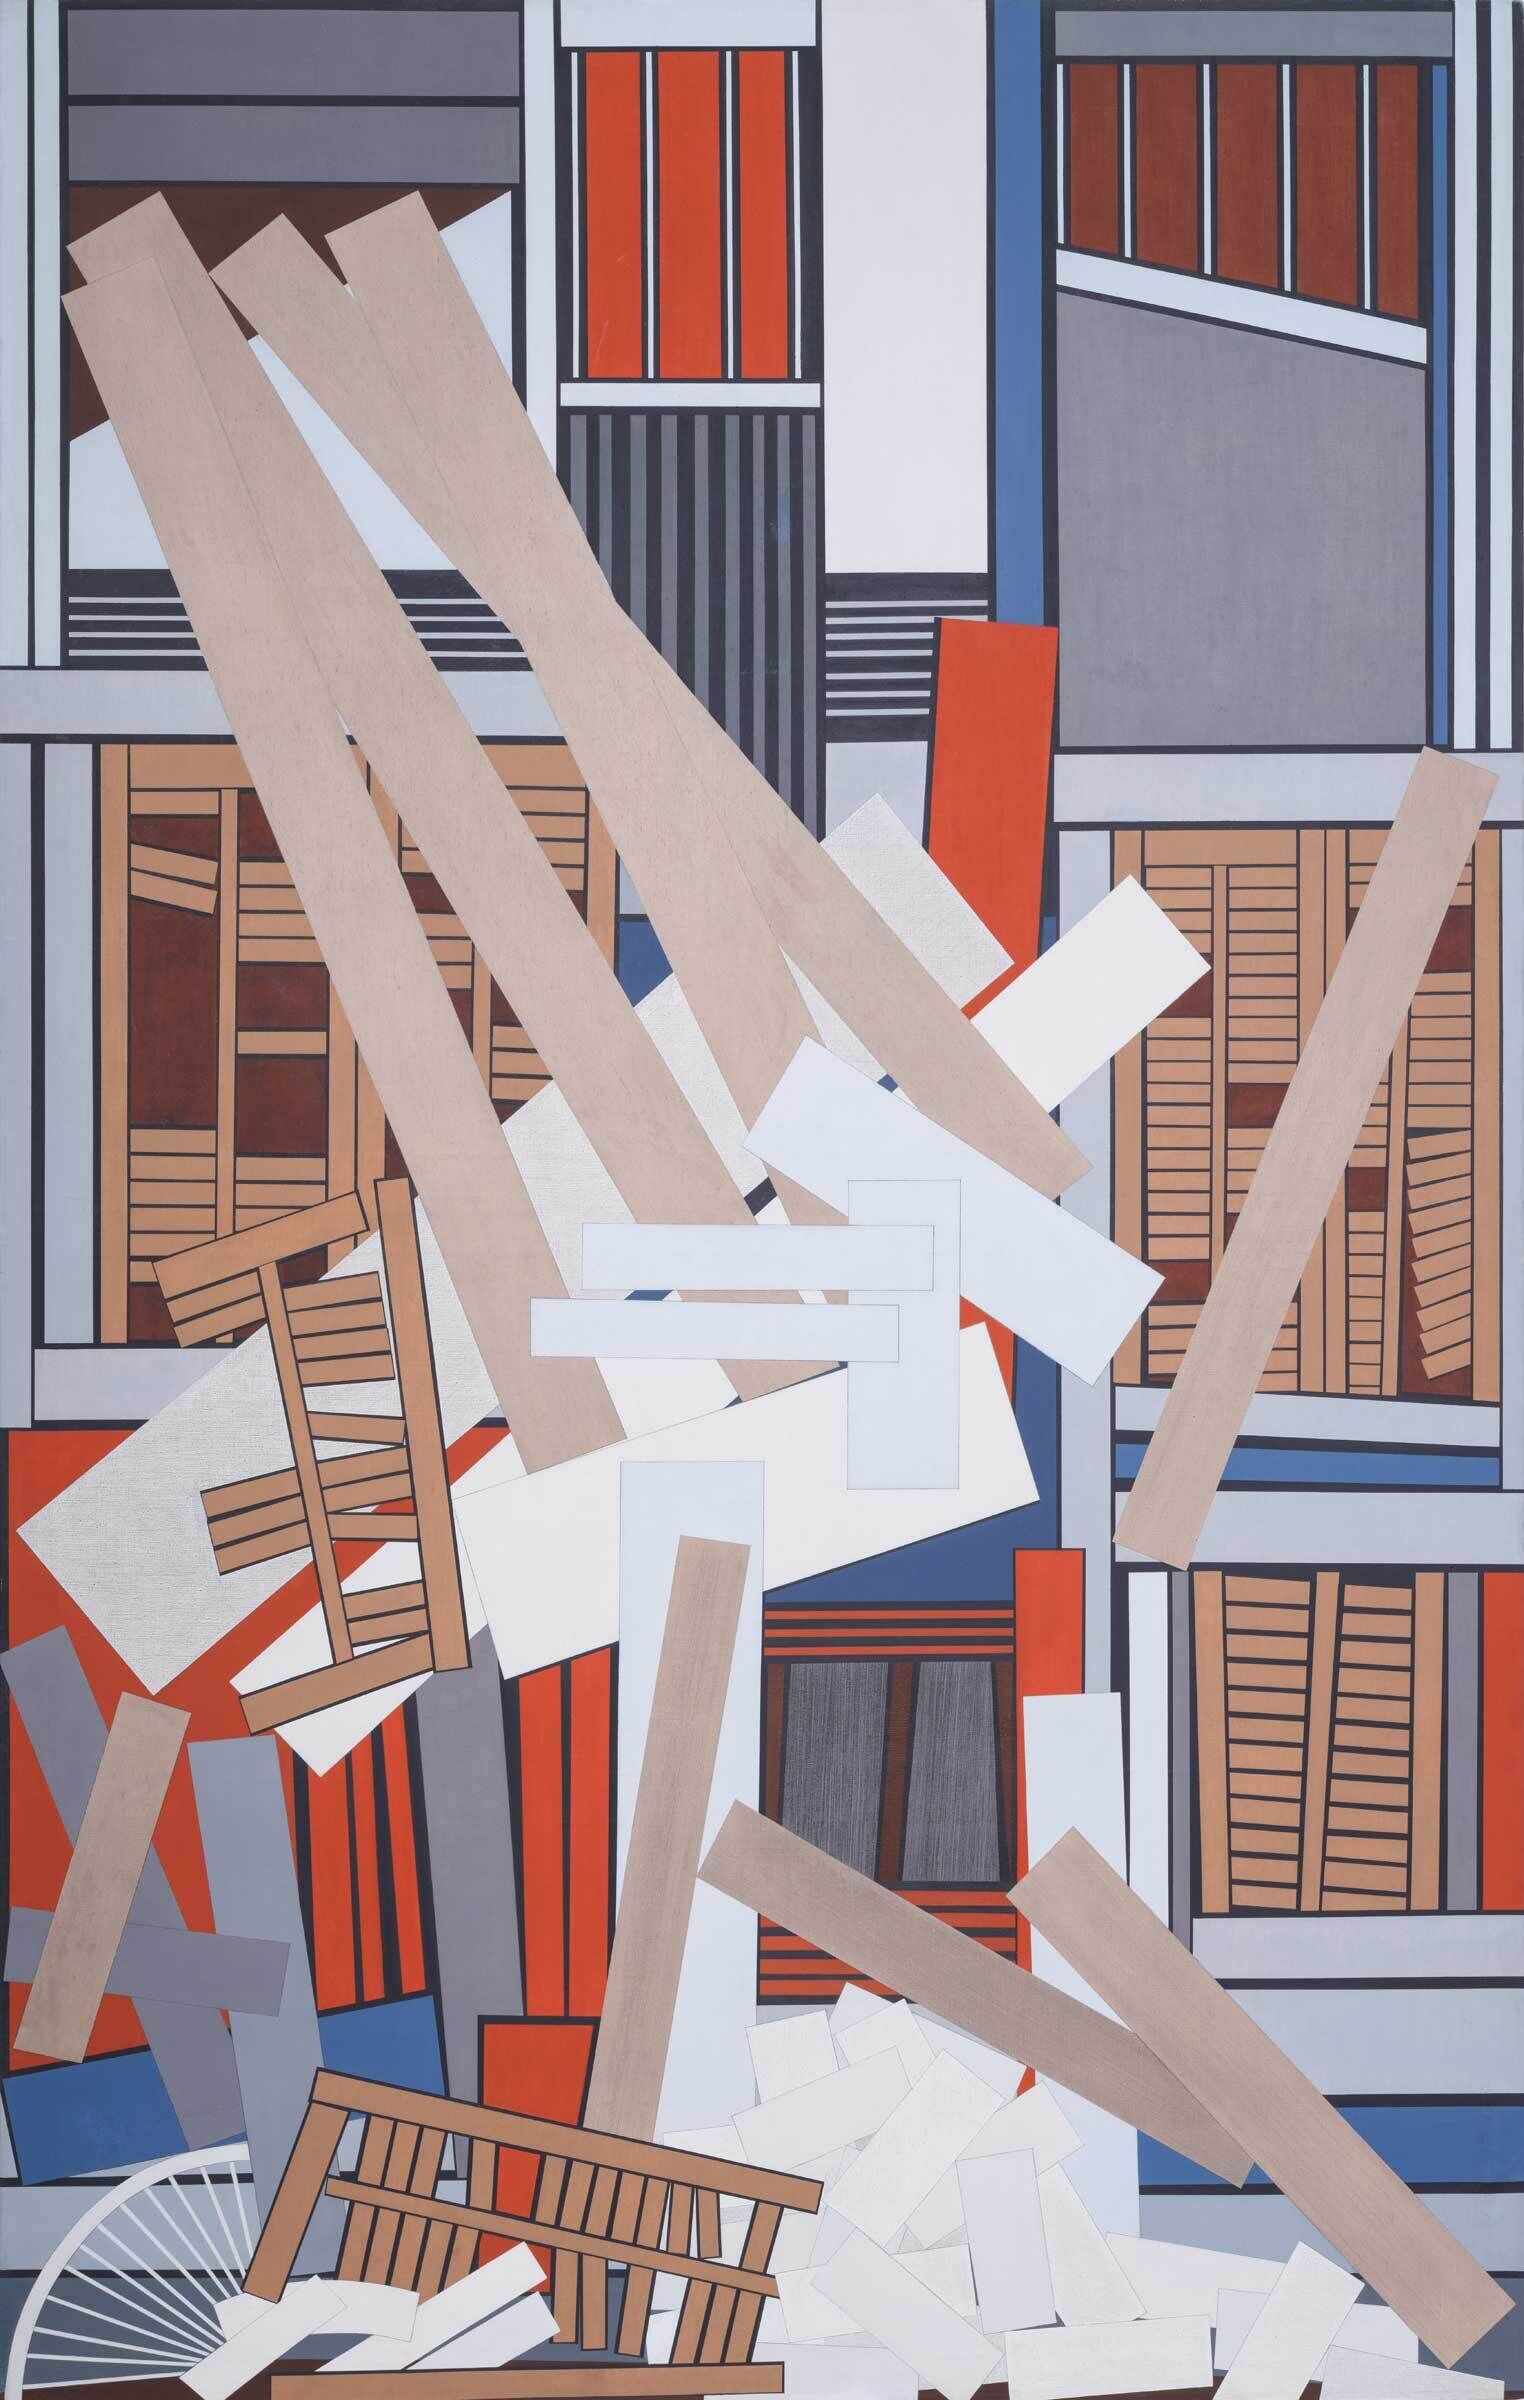 Abstract geometric painting with a chaotic arrangement of wooden planks against a backdrop of stylized building facades.